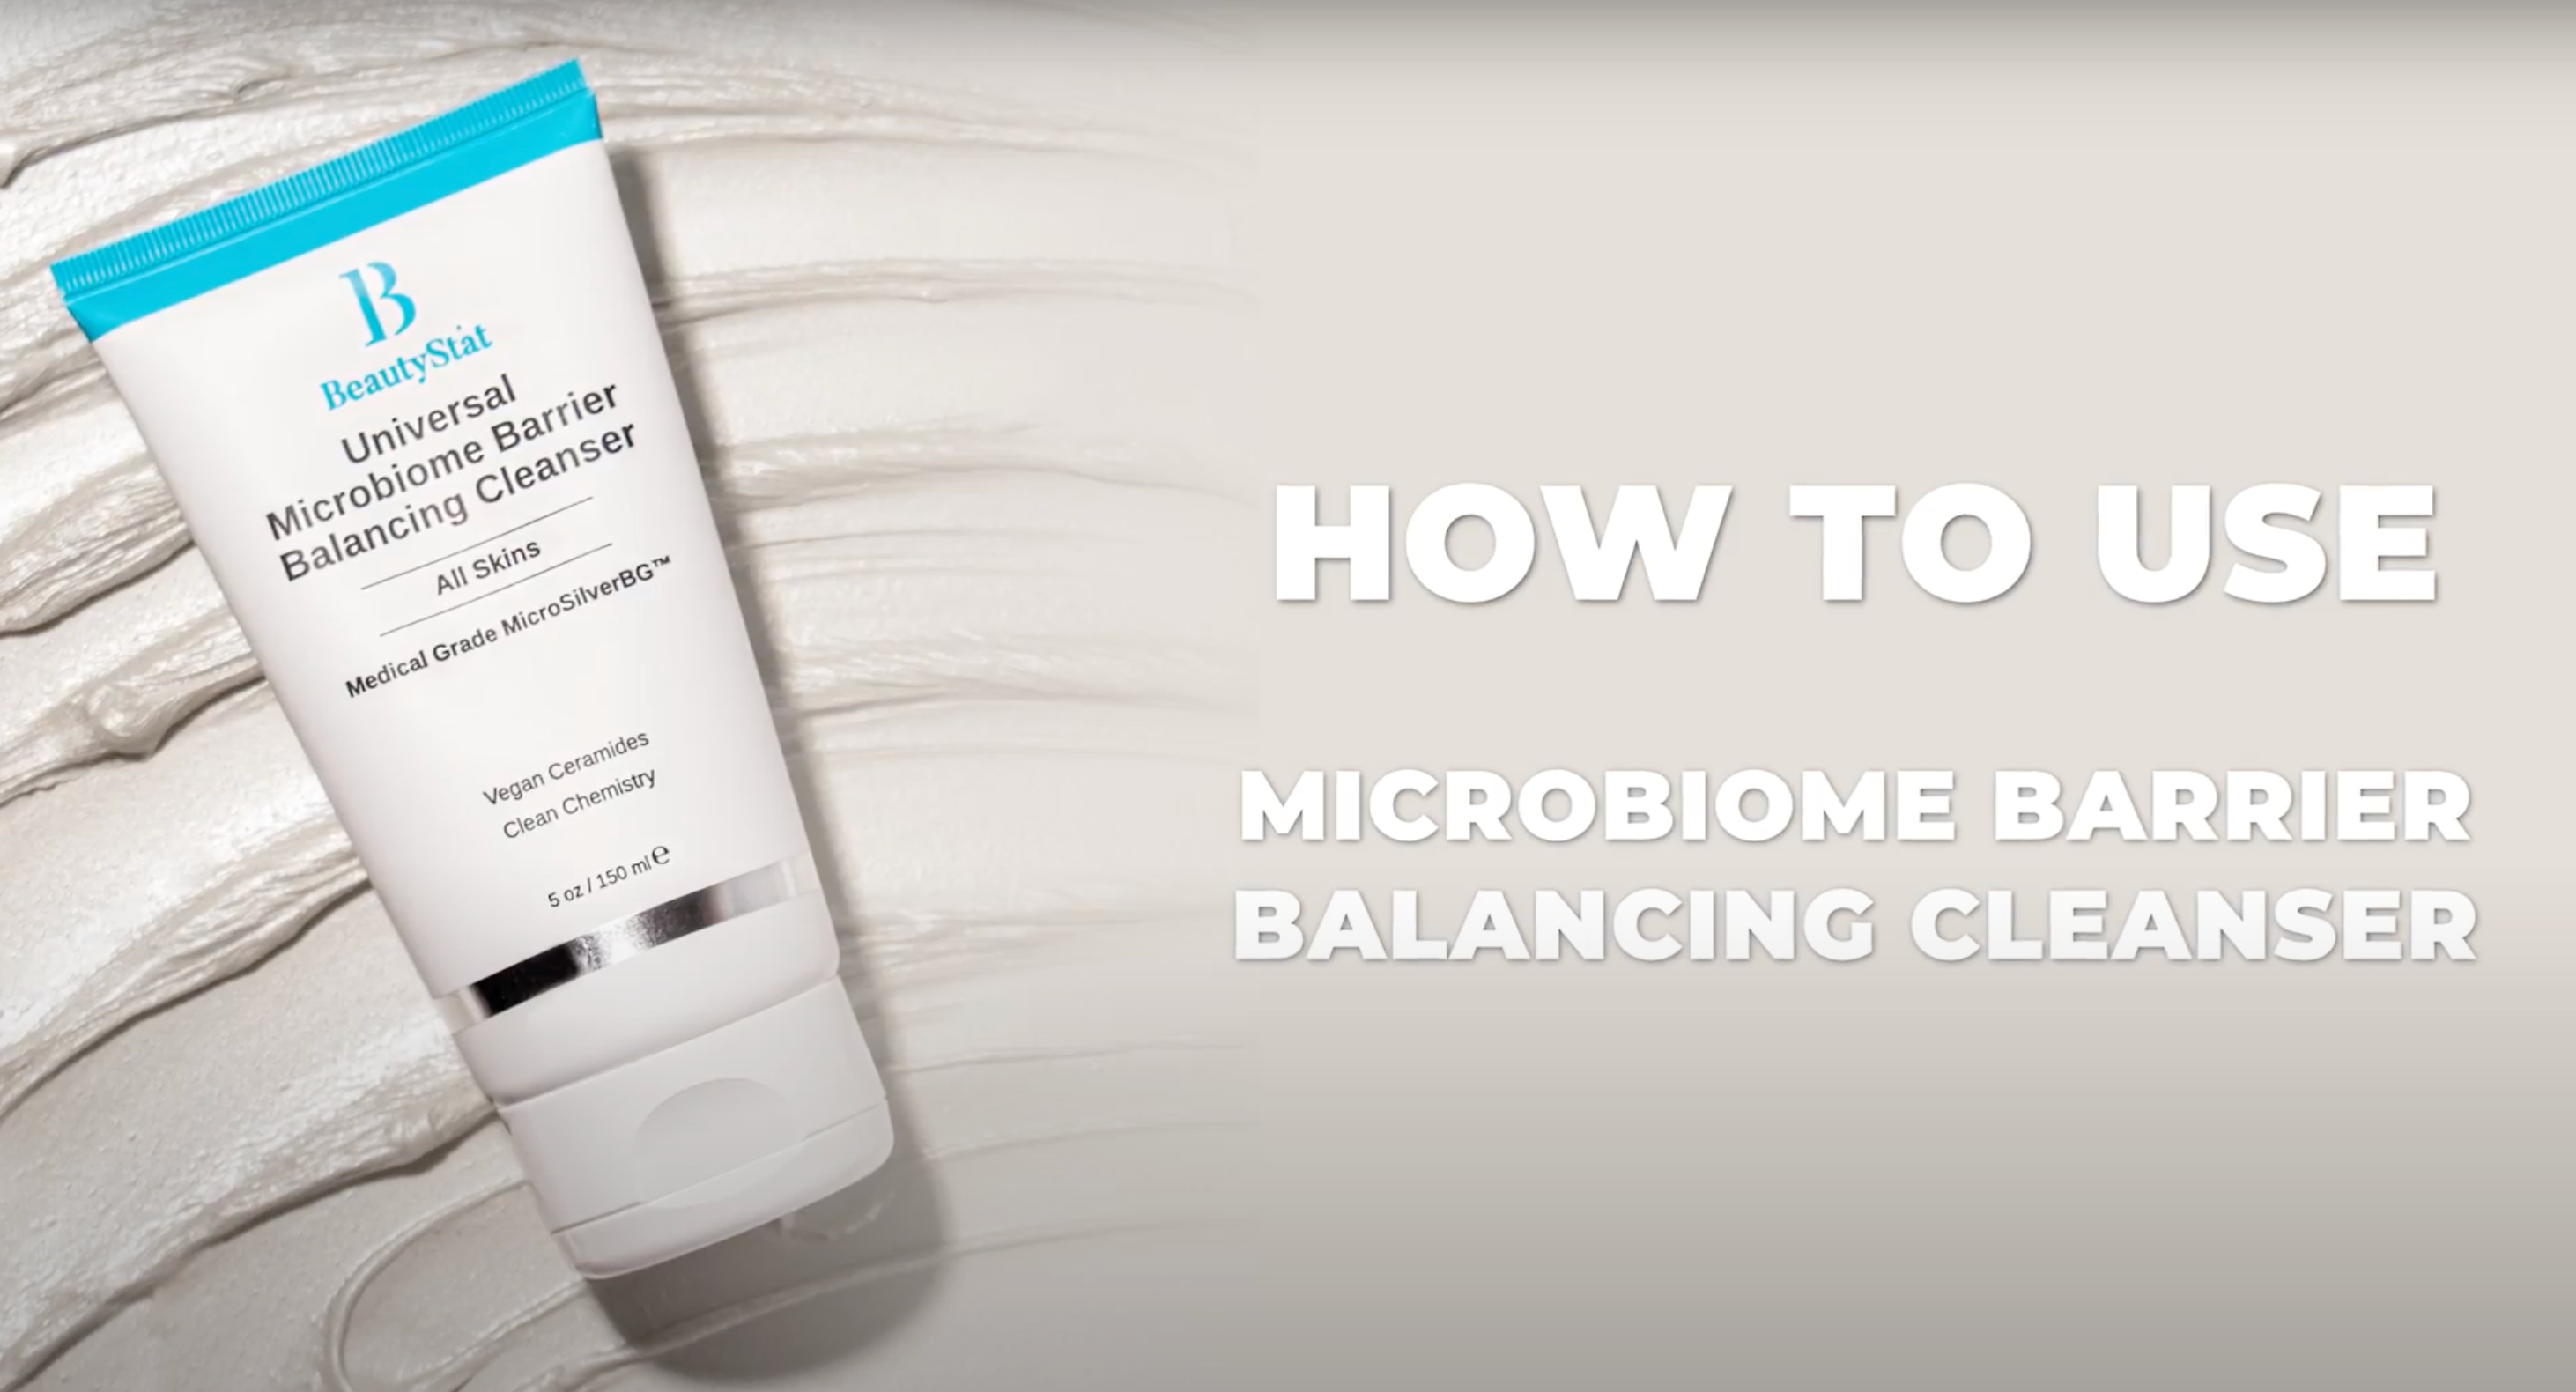 Load video: How To Use Microbiome Barrier Balancing Cleanser